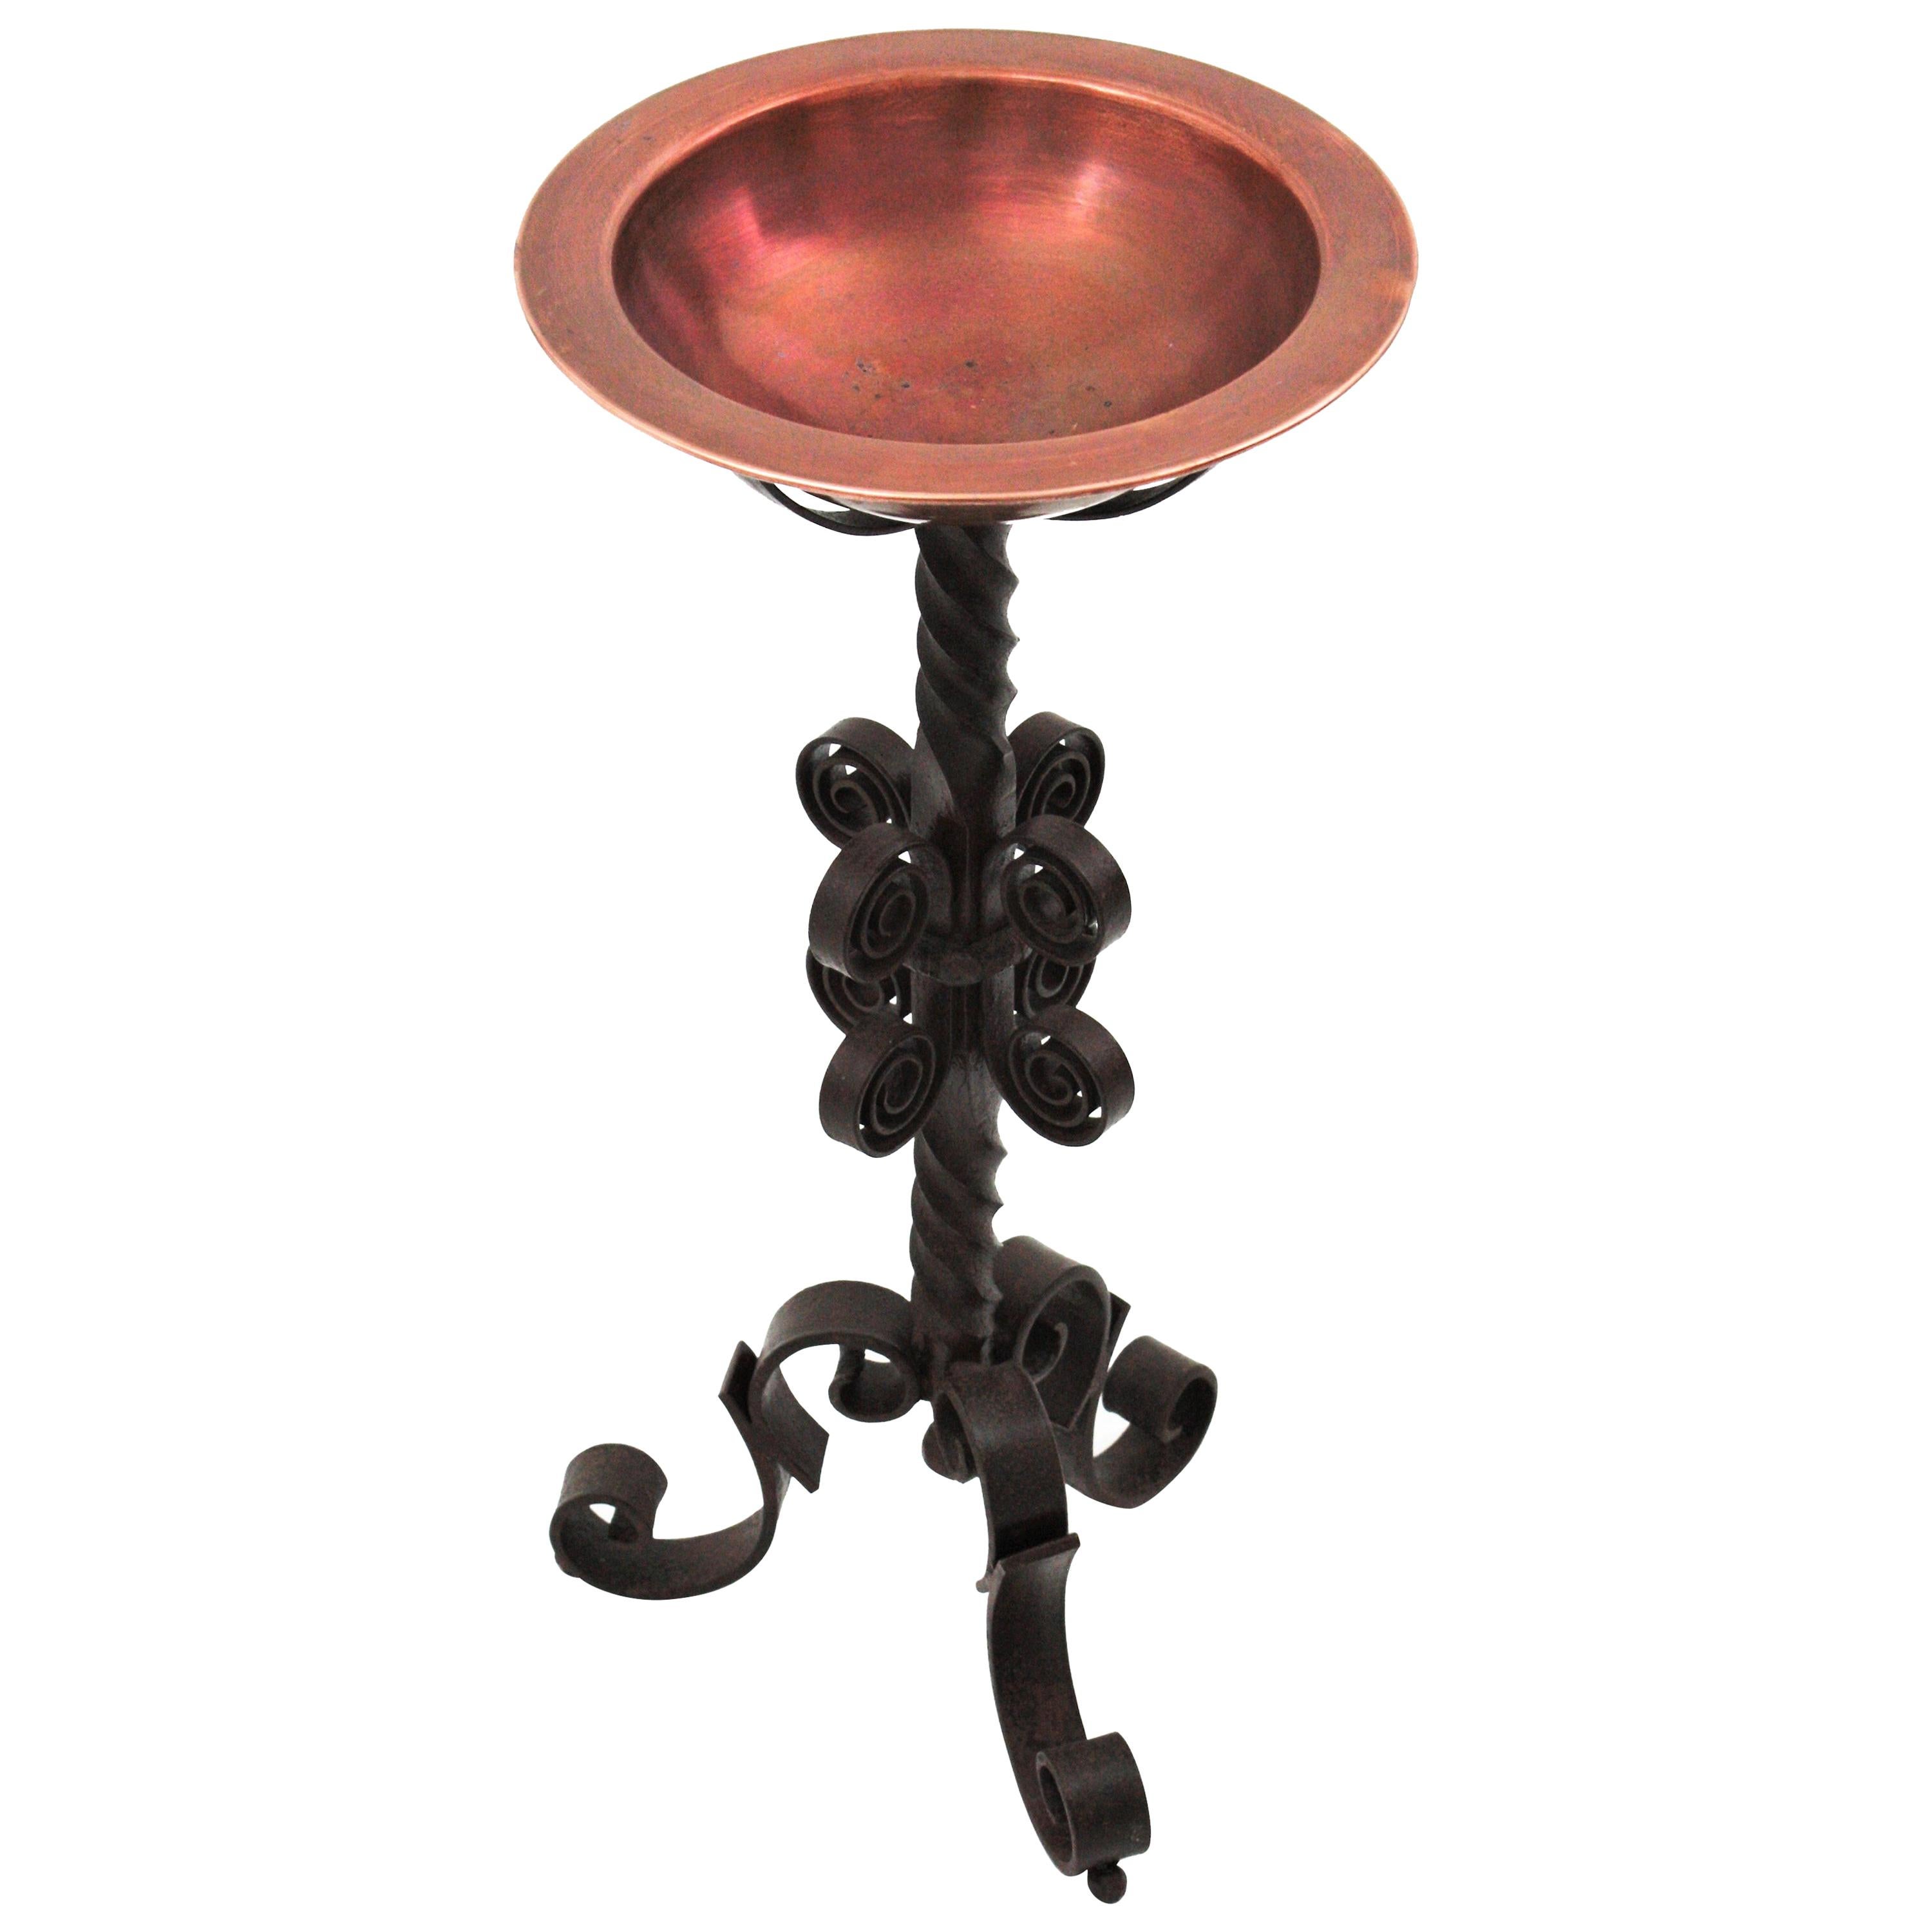 Scrollwork hand forged tripod stand with copper ice bucket, Spain, 1940s
This ice bucket serving stand is all made by hand. The handwrought iron stand has a tripod base with scroll ended feet and a richly scroll adorned twisted stem. Holding a